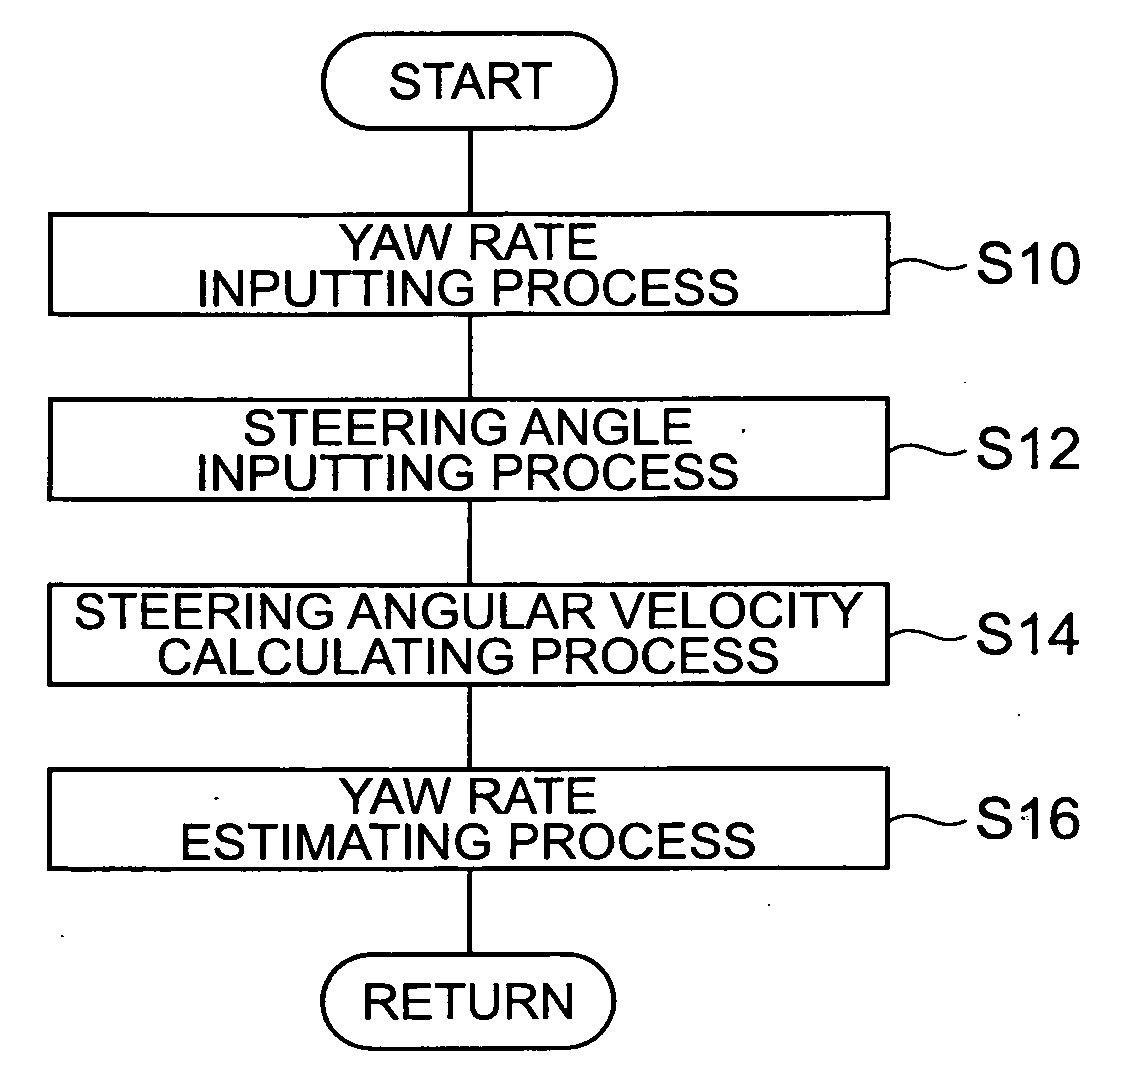 Apparatus for Estimating Yaw Rate